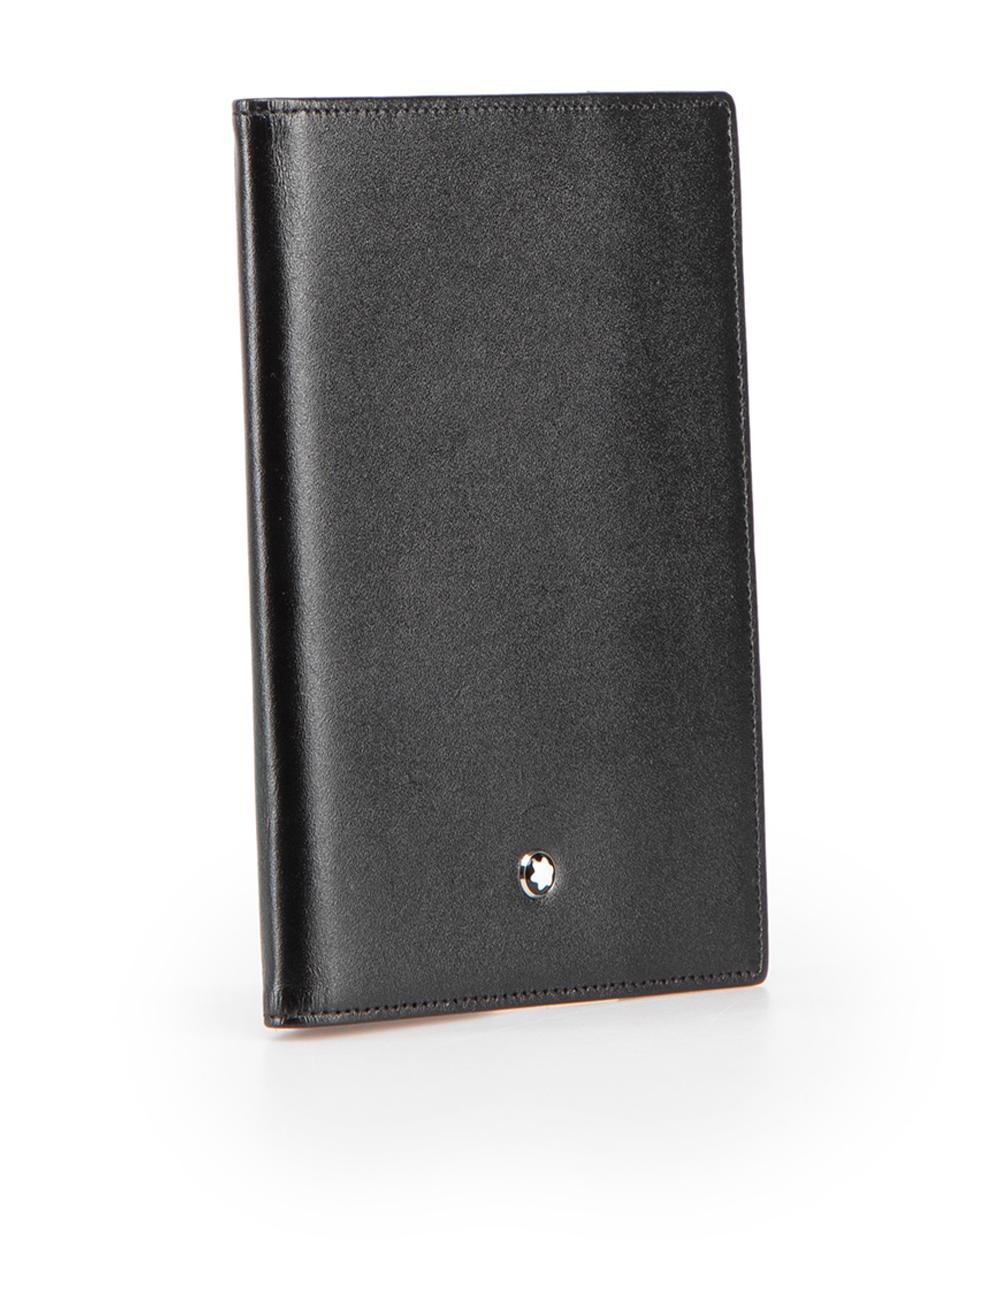 CONDITION is Very good. Minimal wear to passport cover is evident. Minimal wear to the internal pouch with light abrasions to the leather on this used Montblanc designer resale item.
  
Details
Black
Leather
Passport cover
Internal slip sections
 